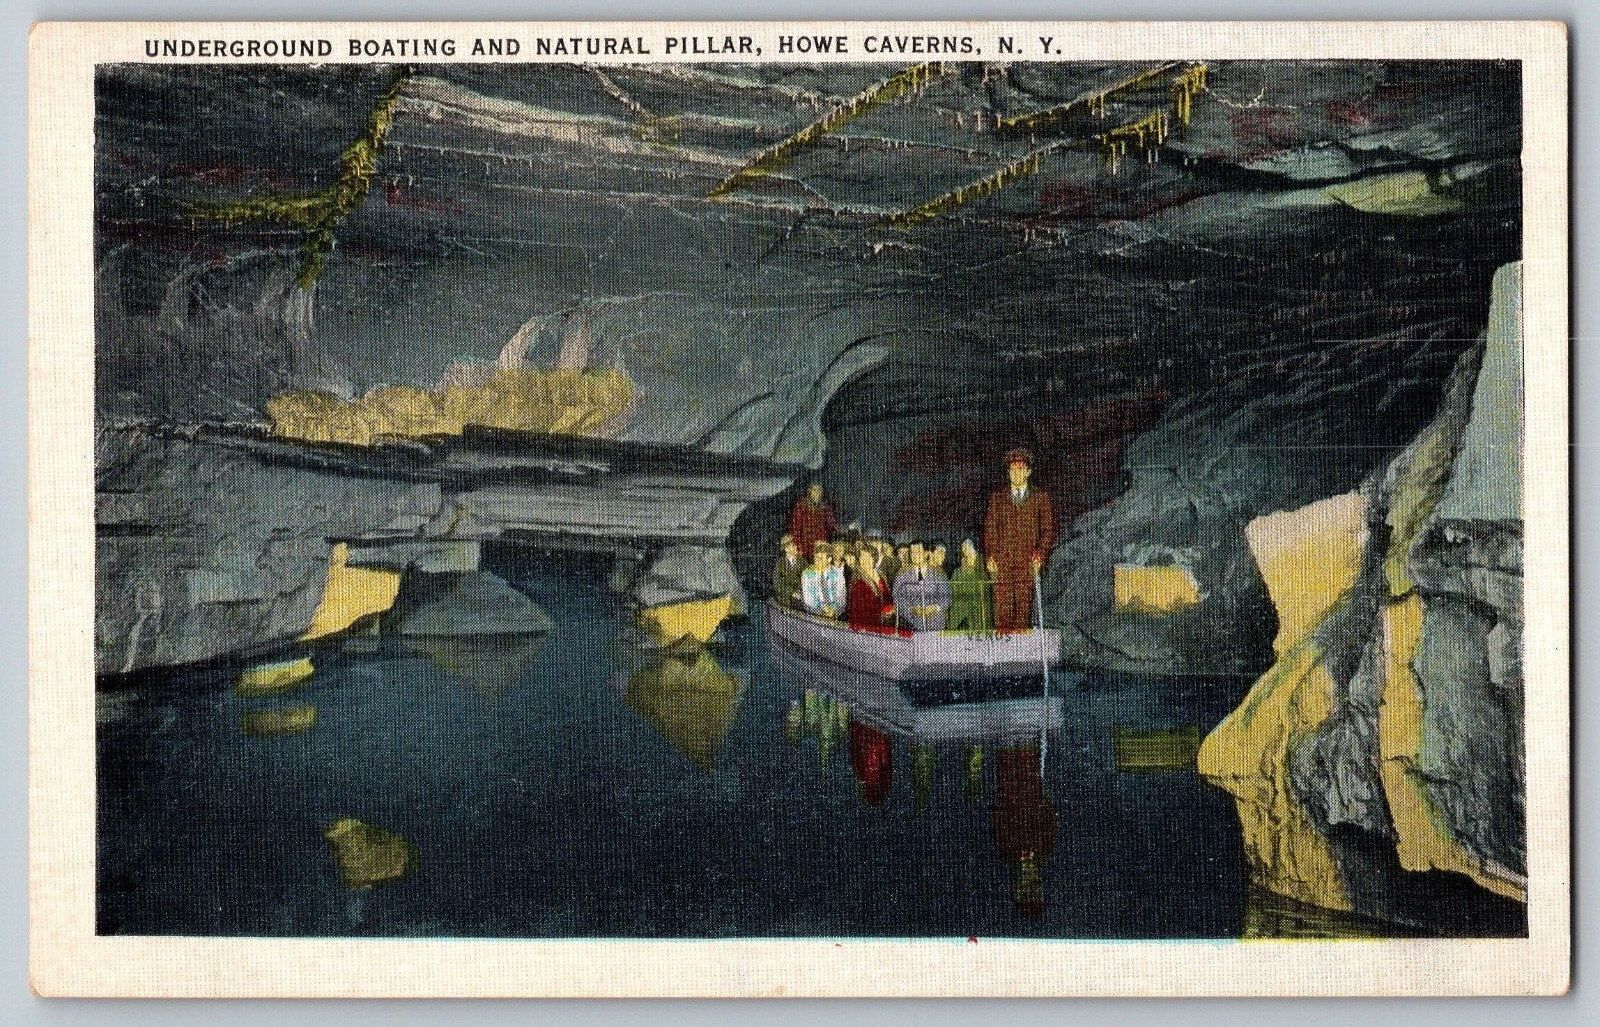 New York NY - Underground Boating at Howe Caverns - Vintage Postcards - Posted